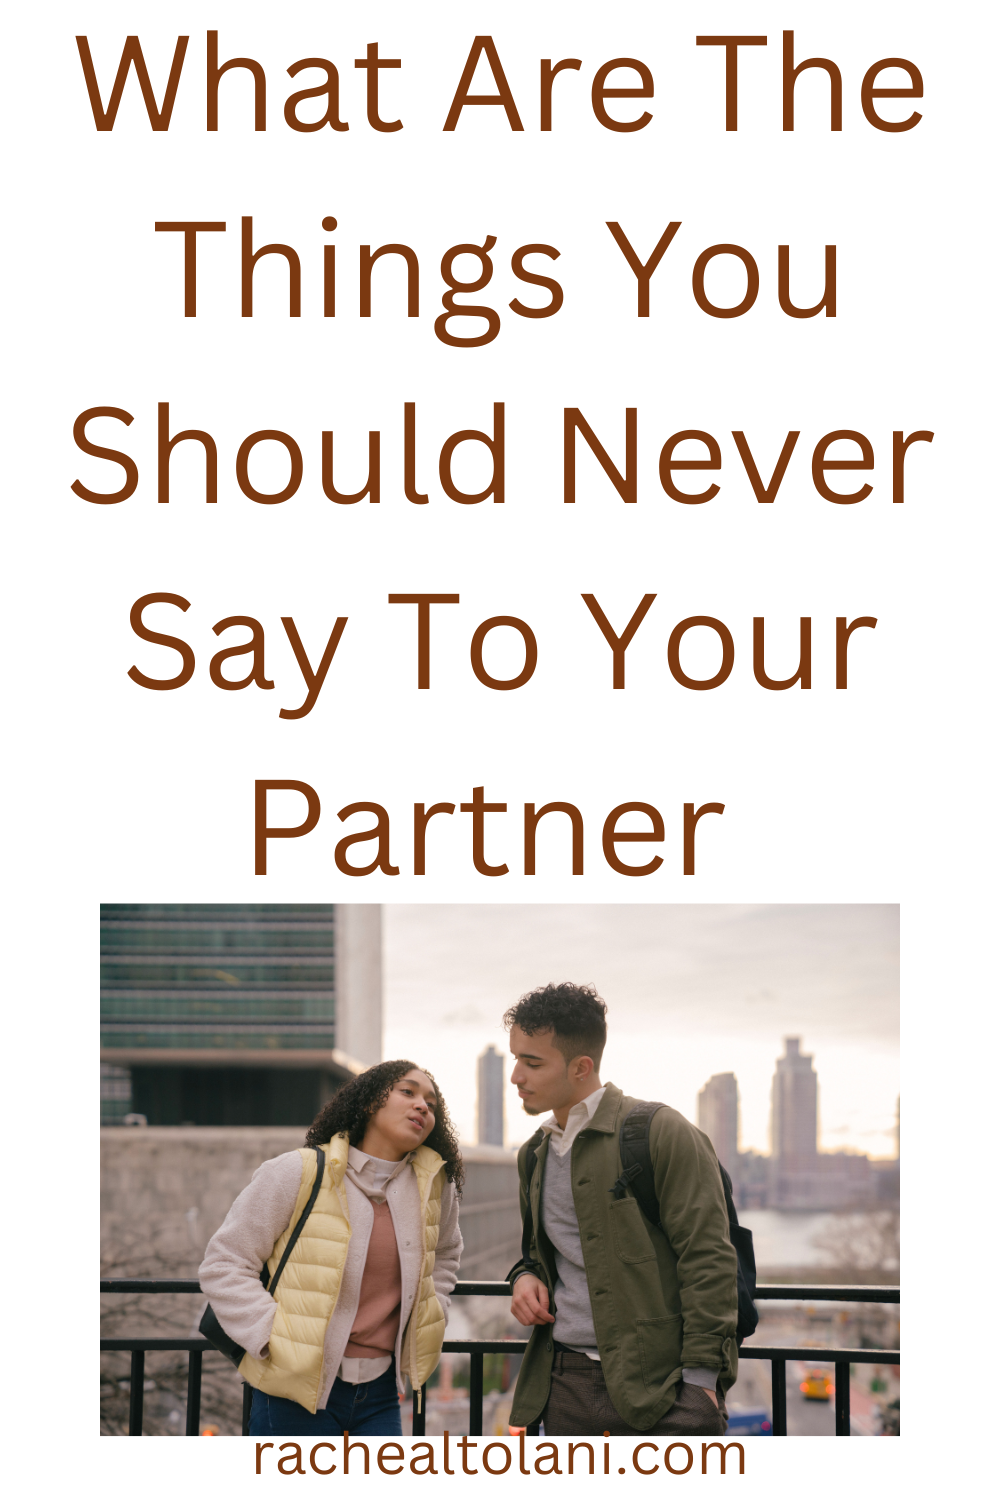 Things you should never say to your partner